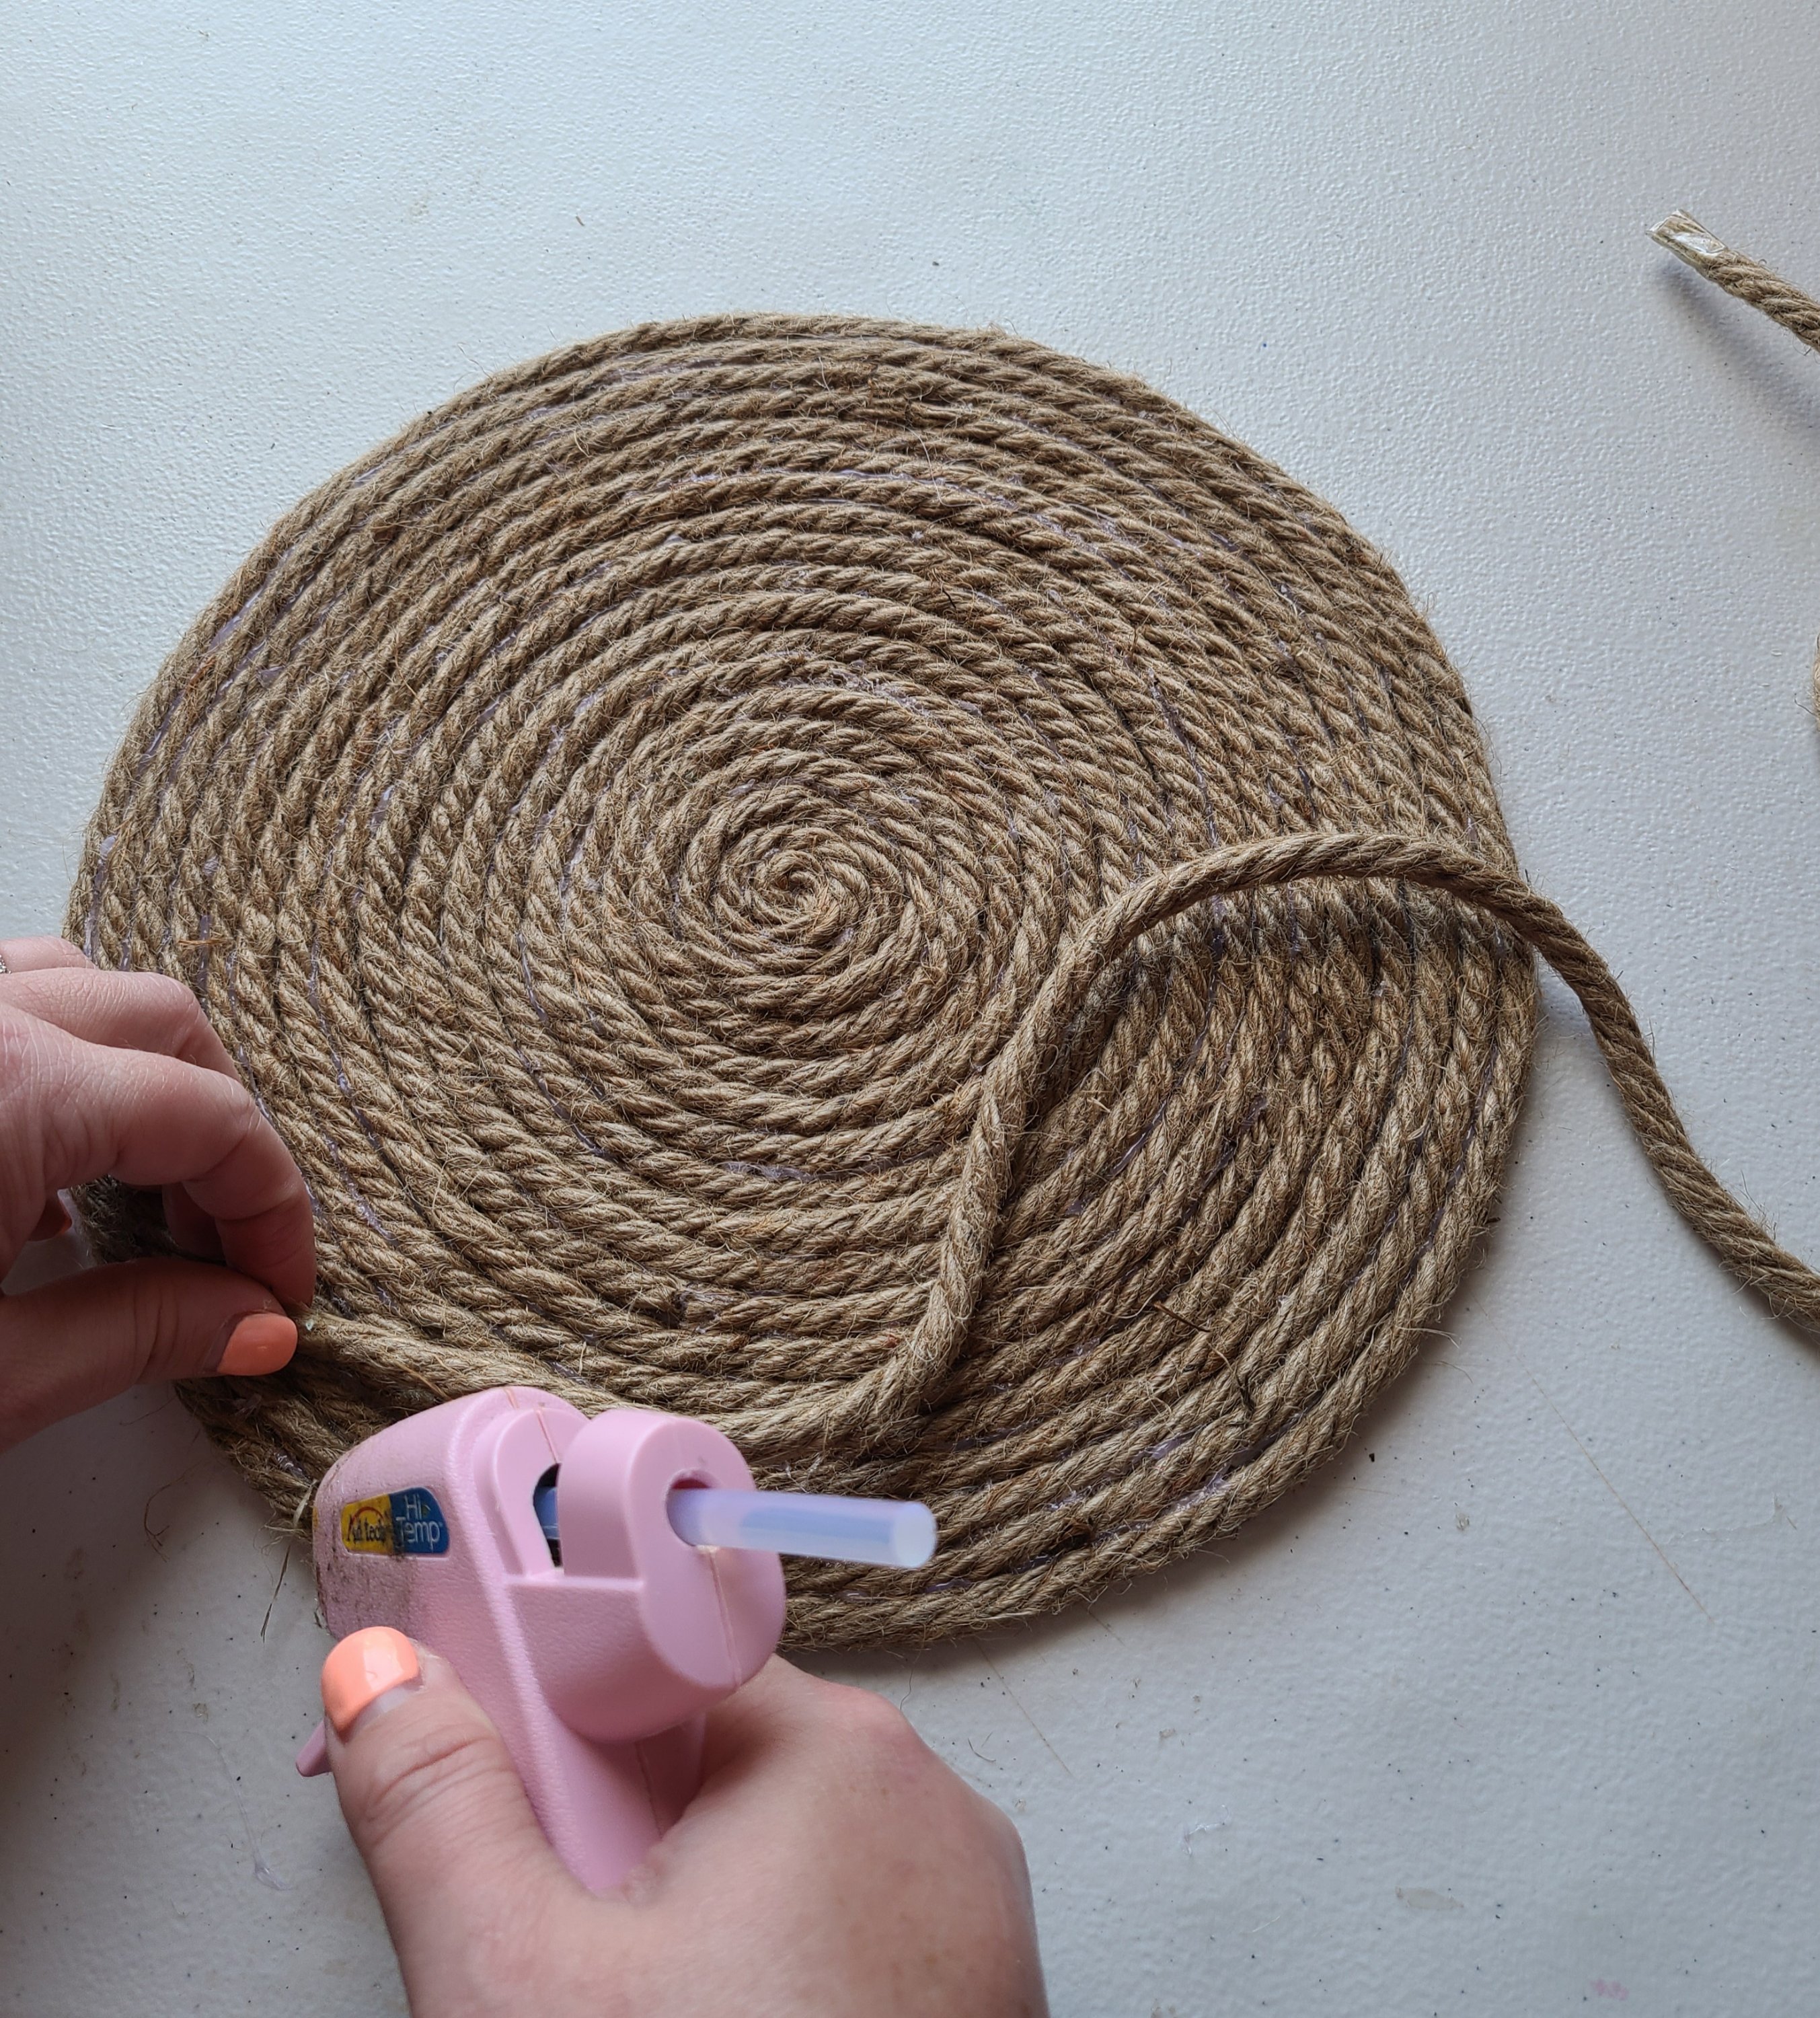 Putting hot glue on the outer ring of the placemat to start building the rope tray.